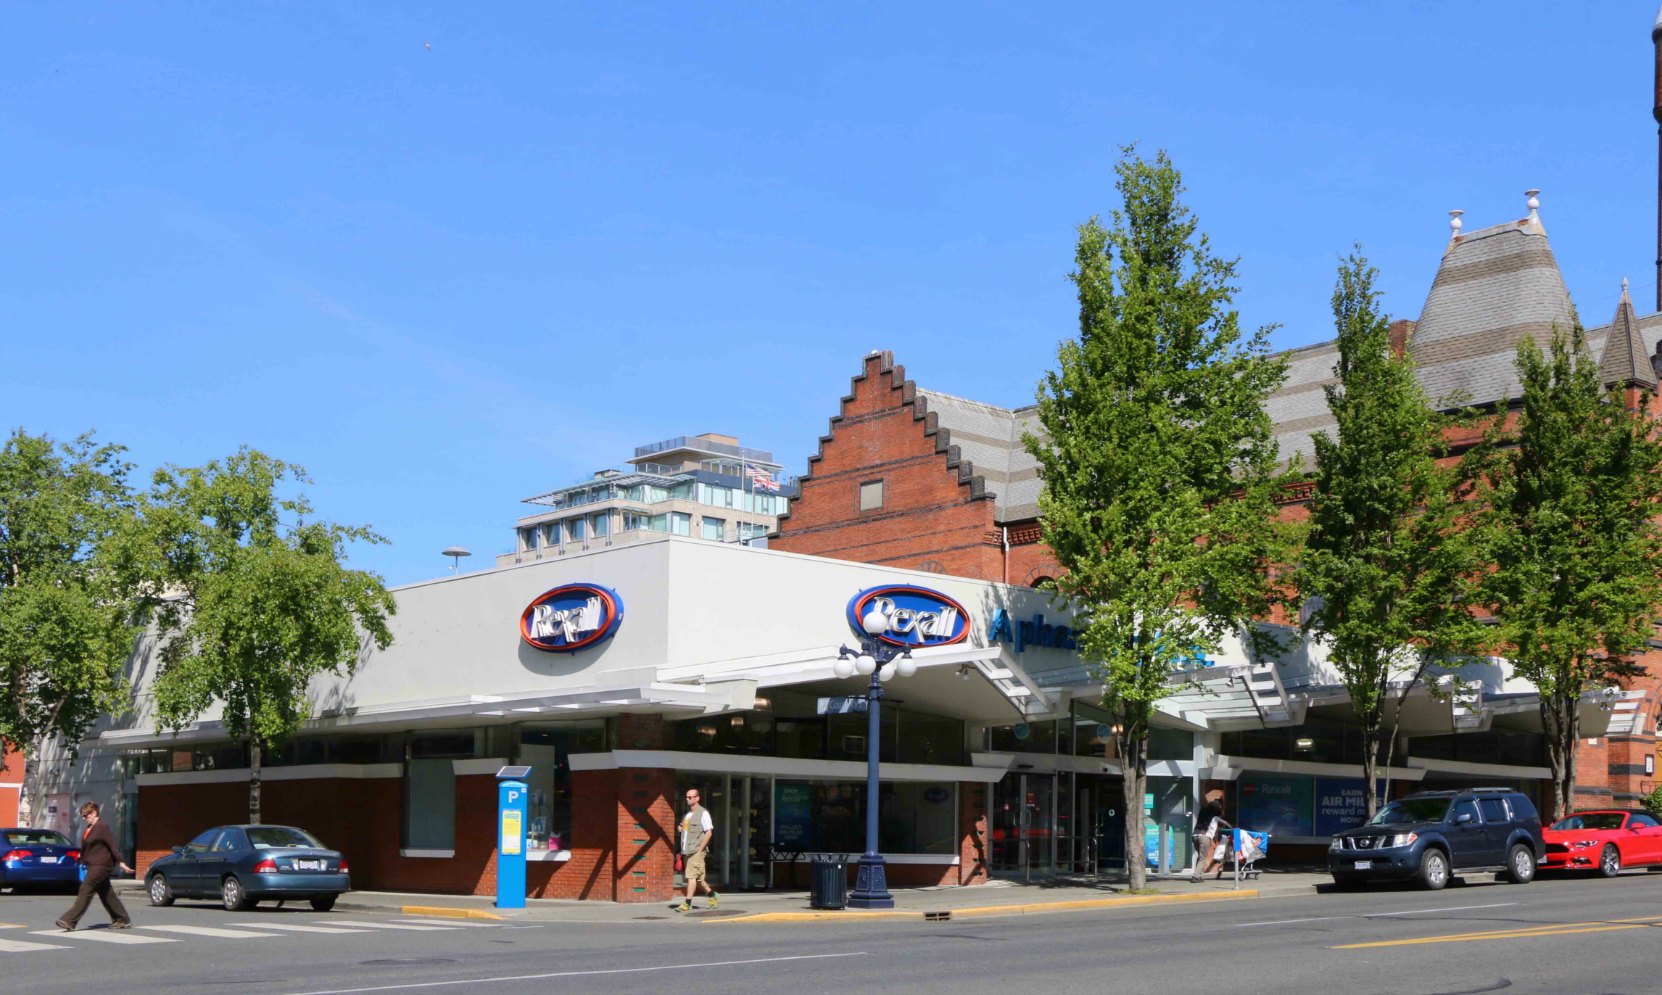 912 Douglas Street, now occupied by Rexall Drugs, was built in 1953 by architect John Di Castri for Ballantyne's Florists (photo by Victoria Online Sightseeing Tours)